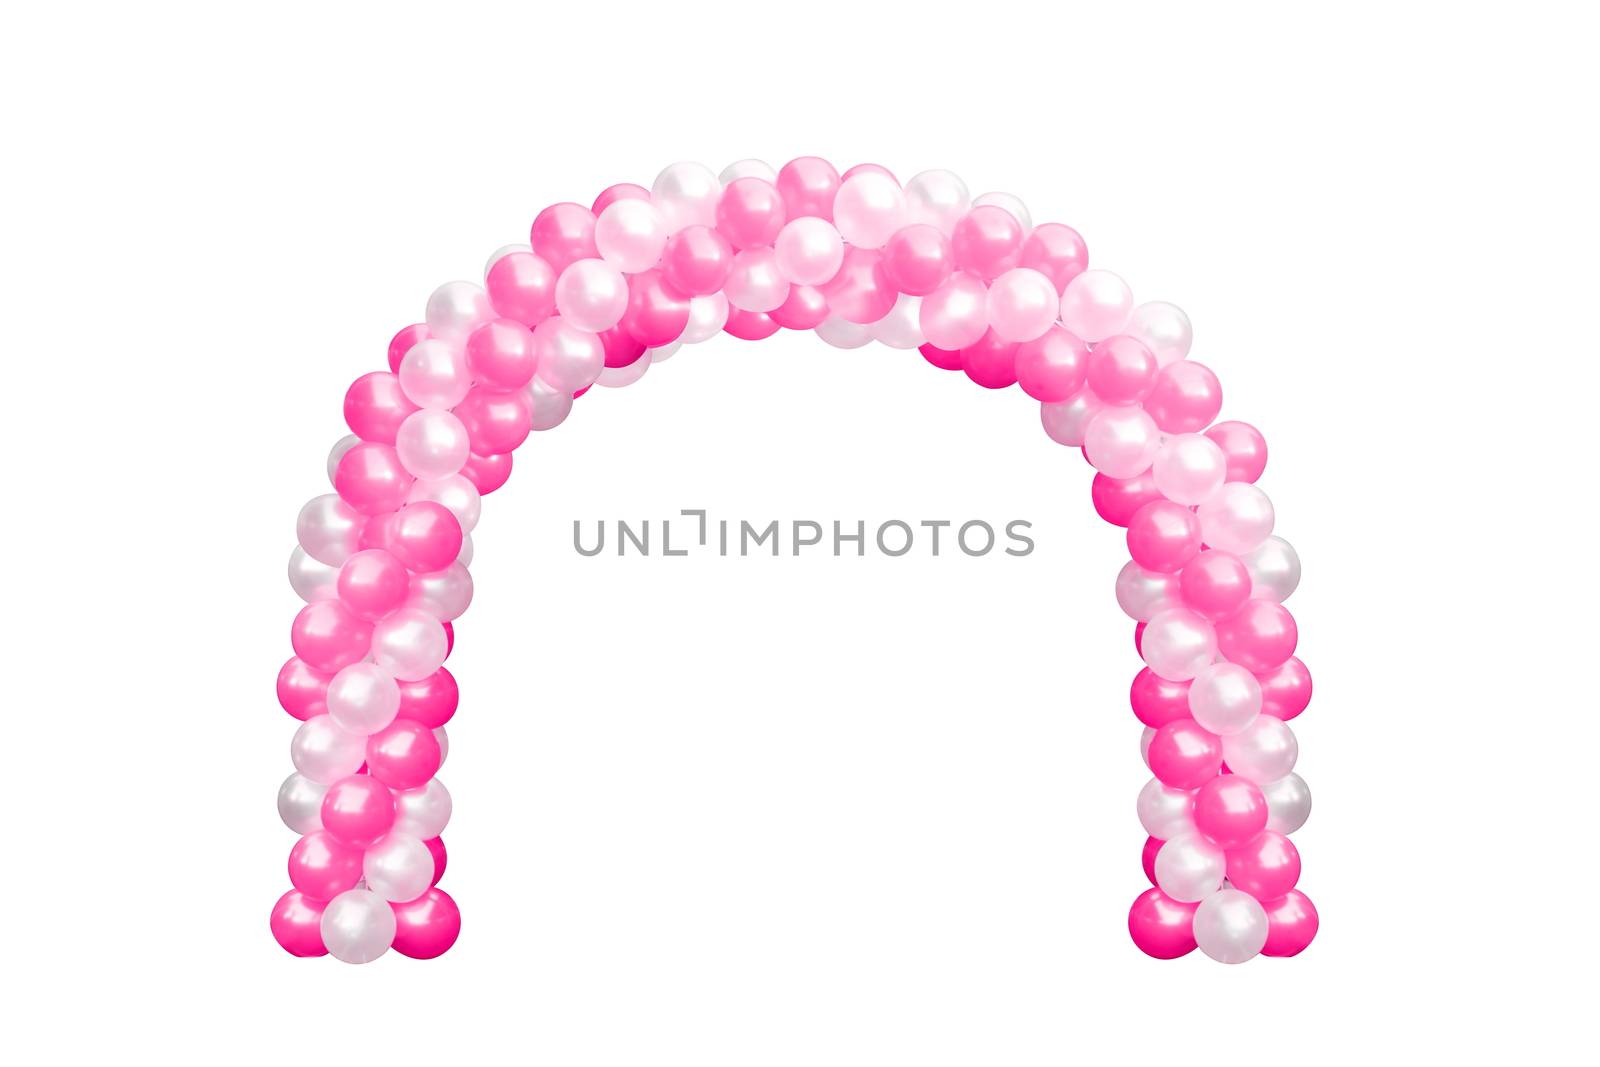 Balloon Archway door Pink and white, Arches wedding, Balloon Festival design decoration elements with arch floral design isolated on white Background